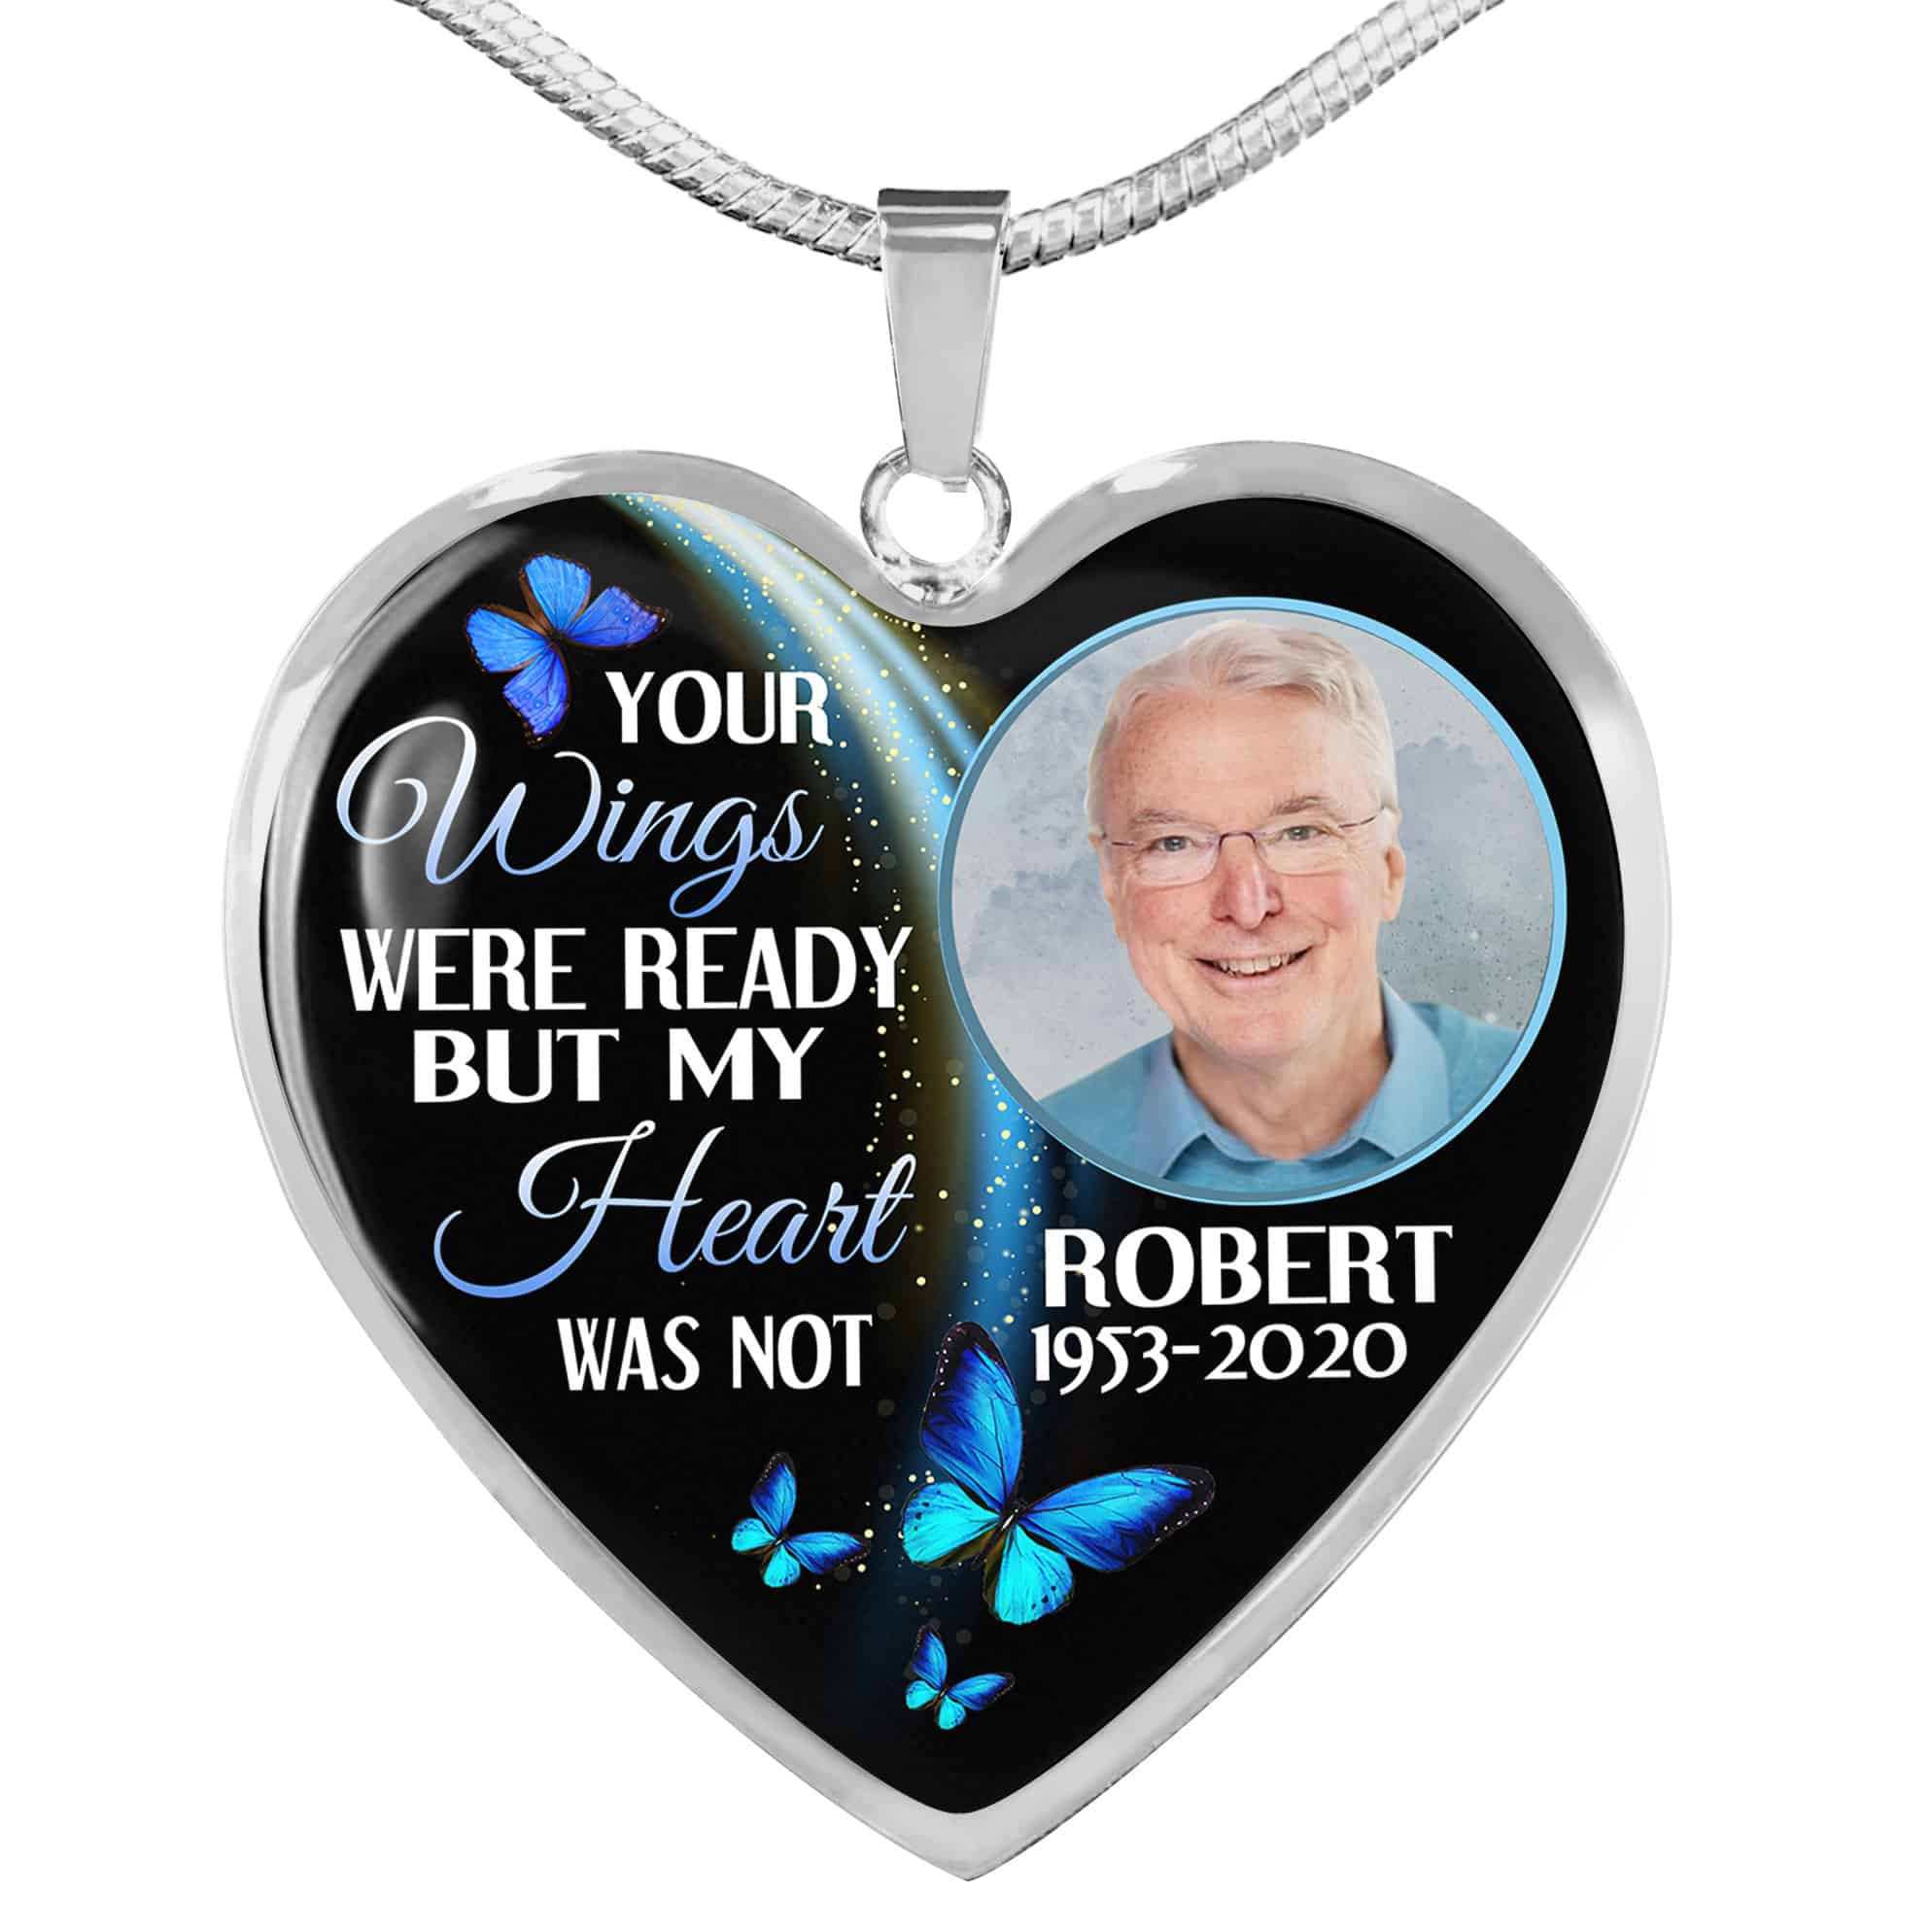 Personalized Memorial Necklace – Your Wings Were Ready Custom 